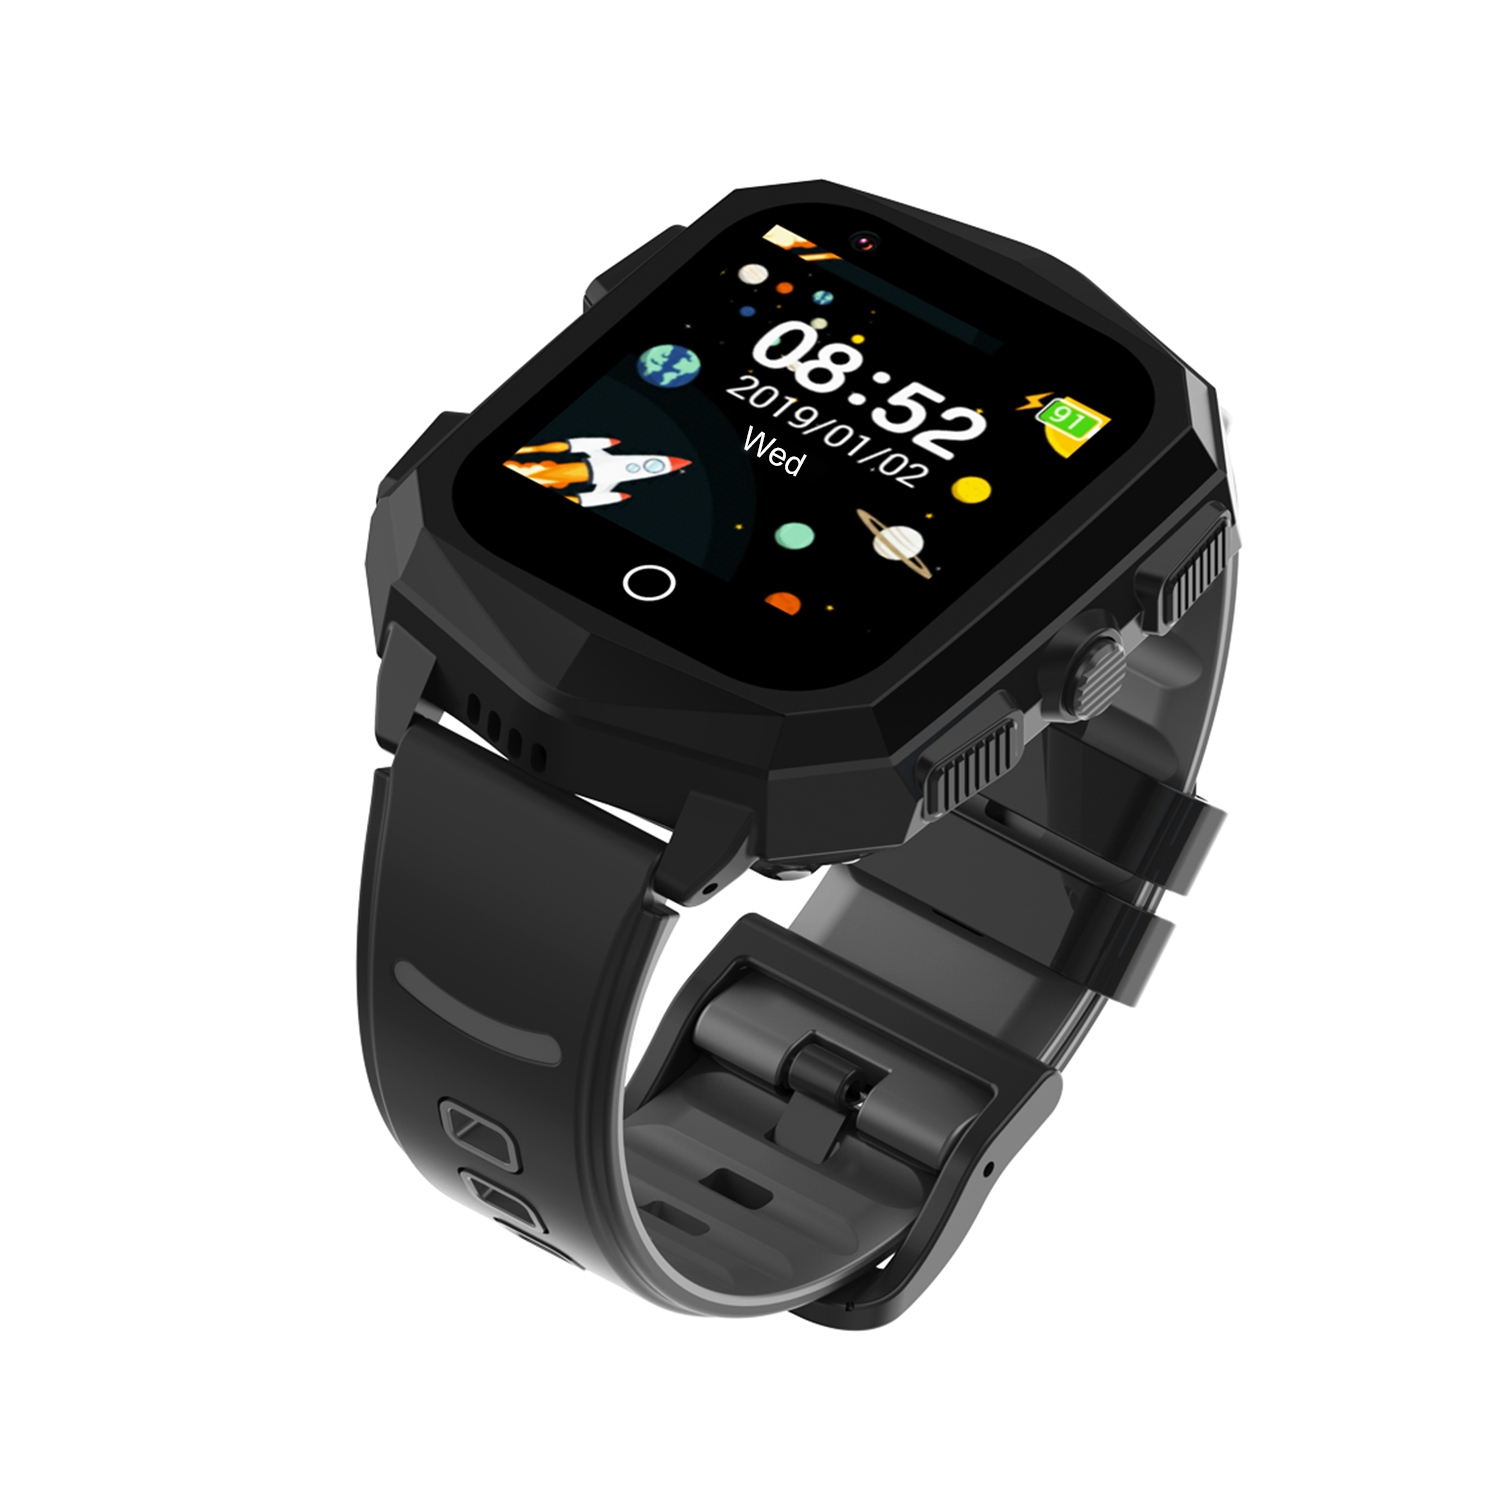 IP67 waterproof 4G promotion Gift GPS watch with Remote Snapshot Y49